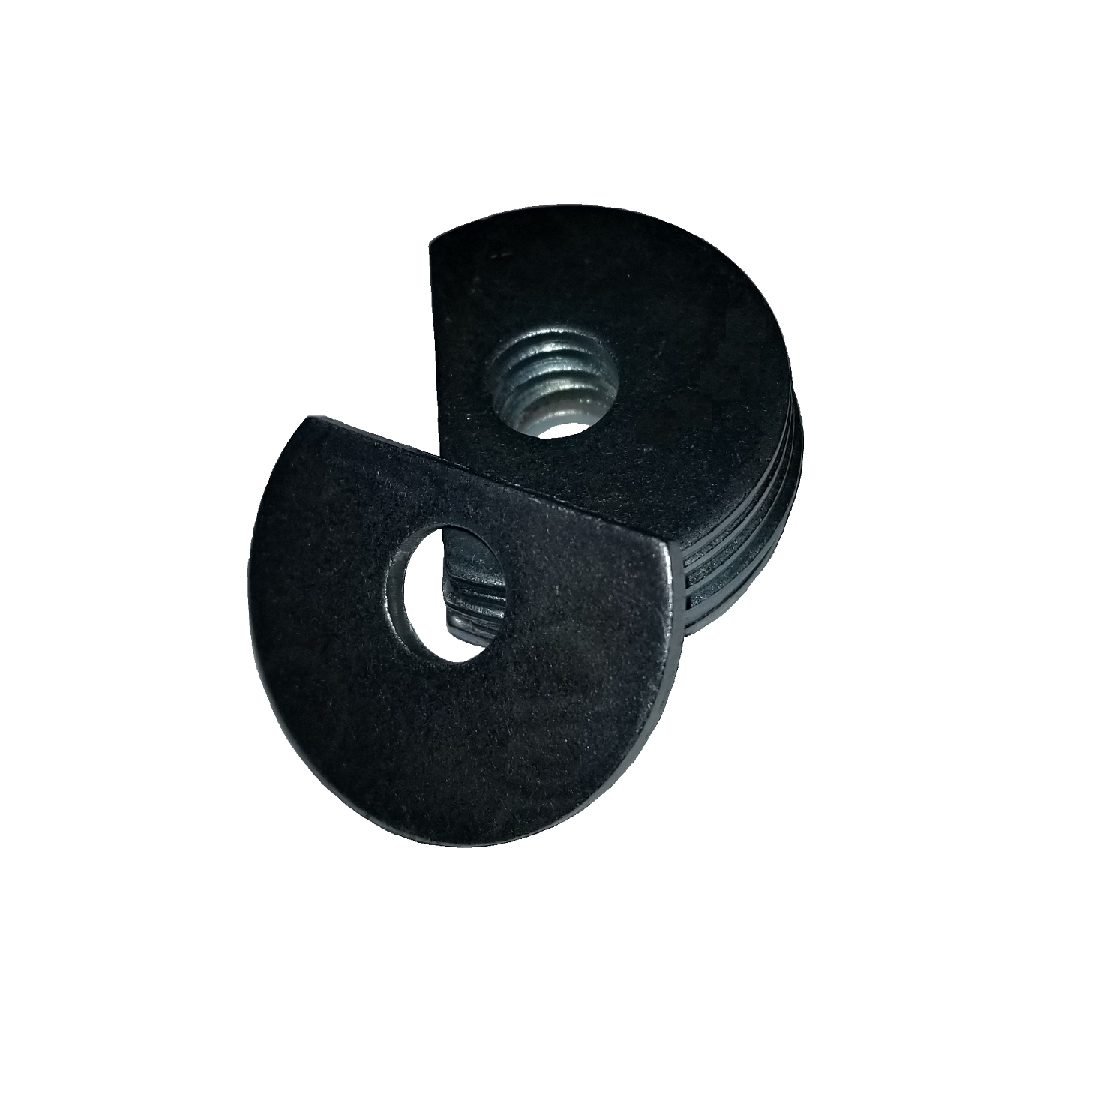 Clipped OD Washer - 0.810 ID, 3.000 OD, 0.250 Thick, Low Carbon Steel - Soft, Zinc & Clear